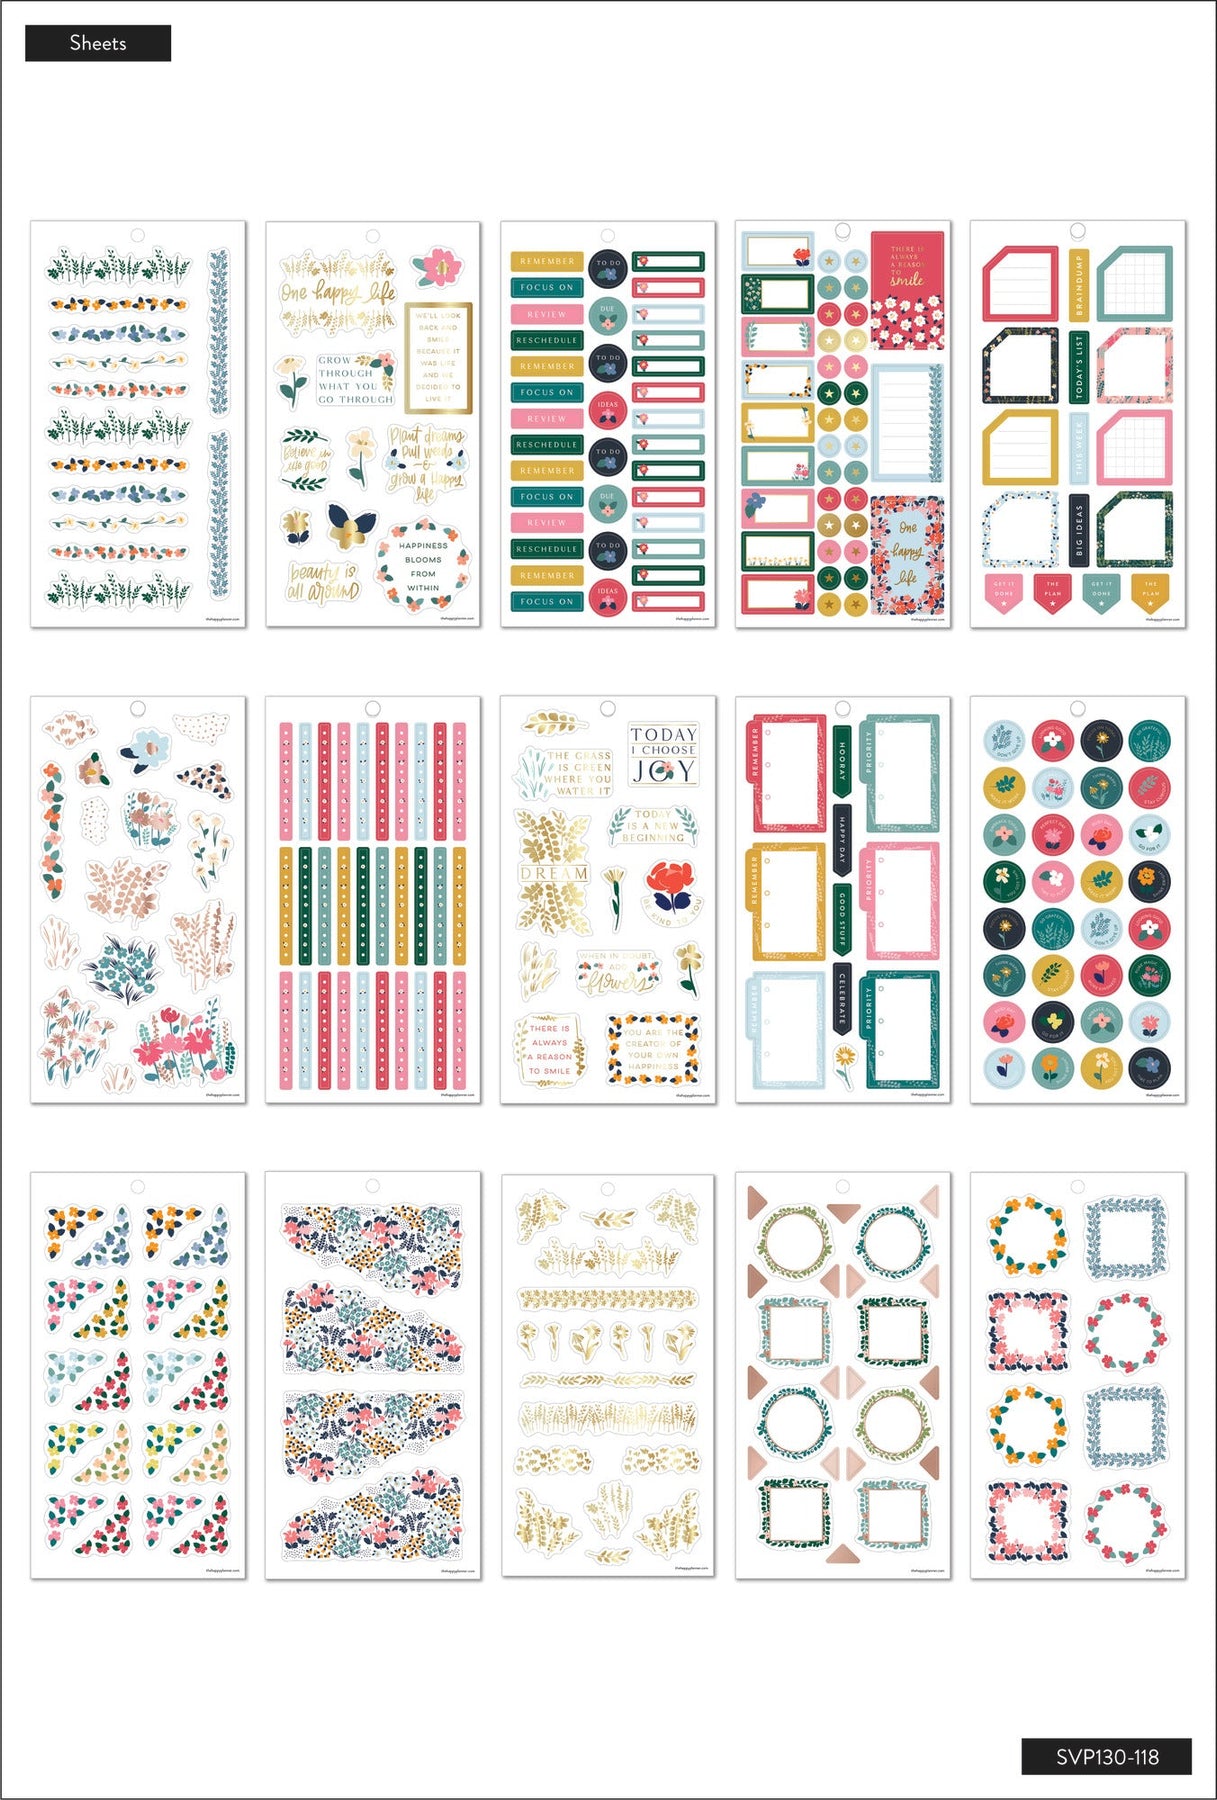 Girly Happy Planner Washi Sticker Book 393 Pieces Rose Gold Accents Glamour  Fun